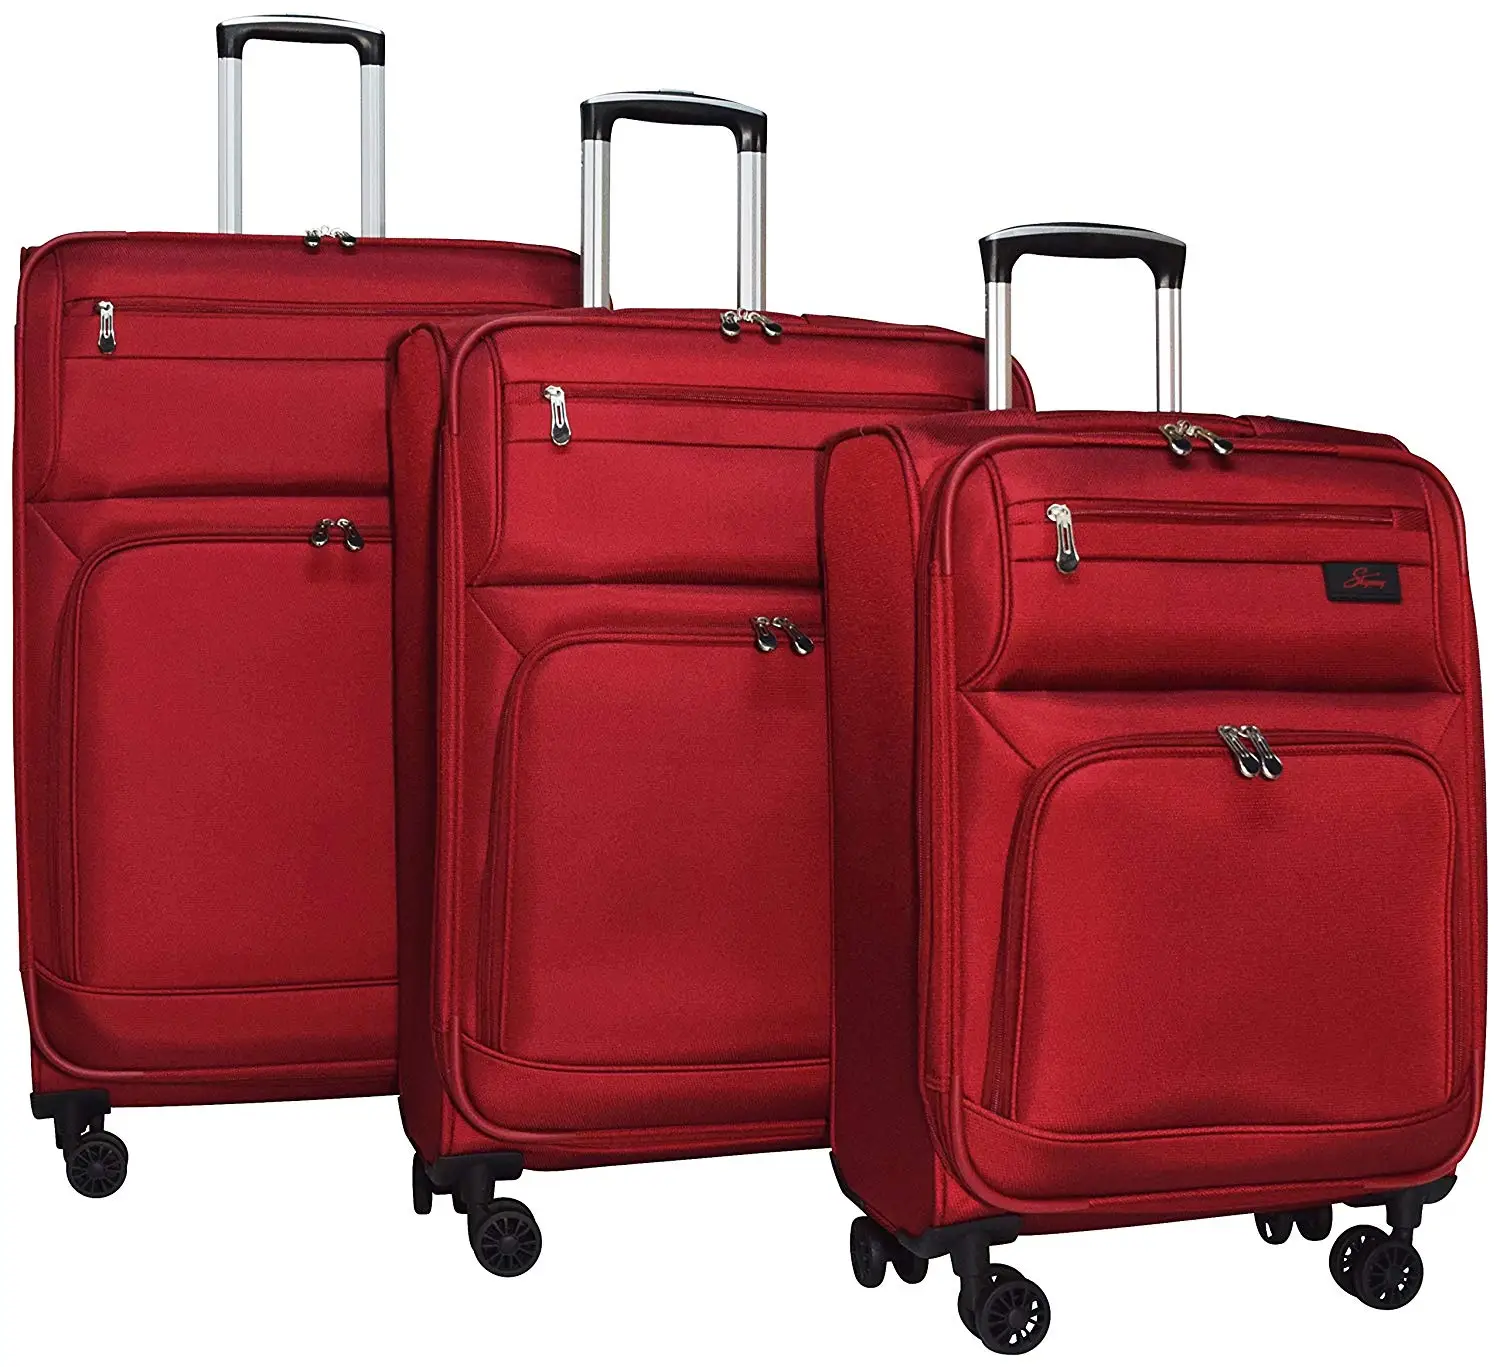 Cheap Skyway Luggage, find Skyway Luggage deals on line at Alibaba.com